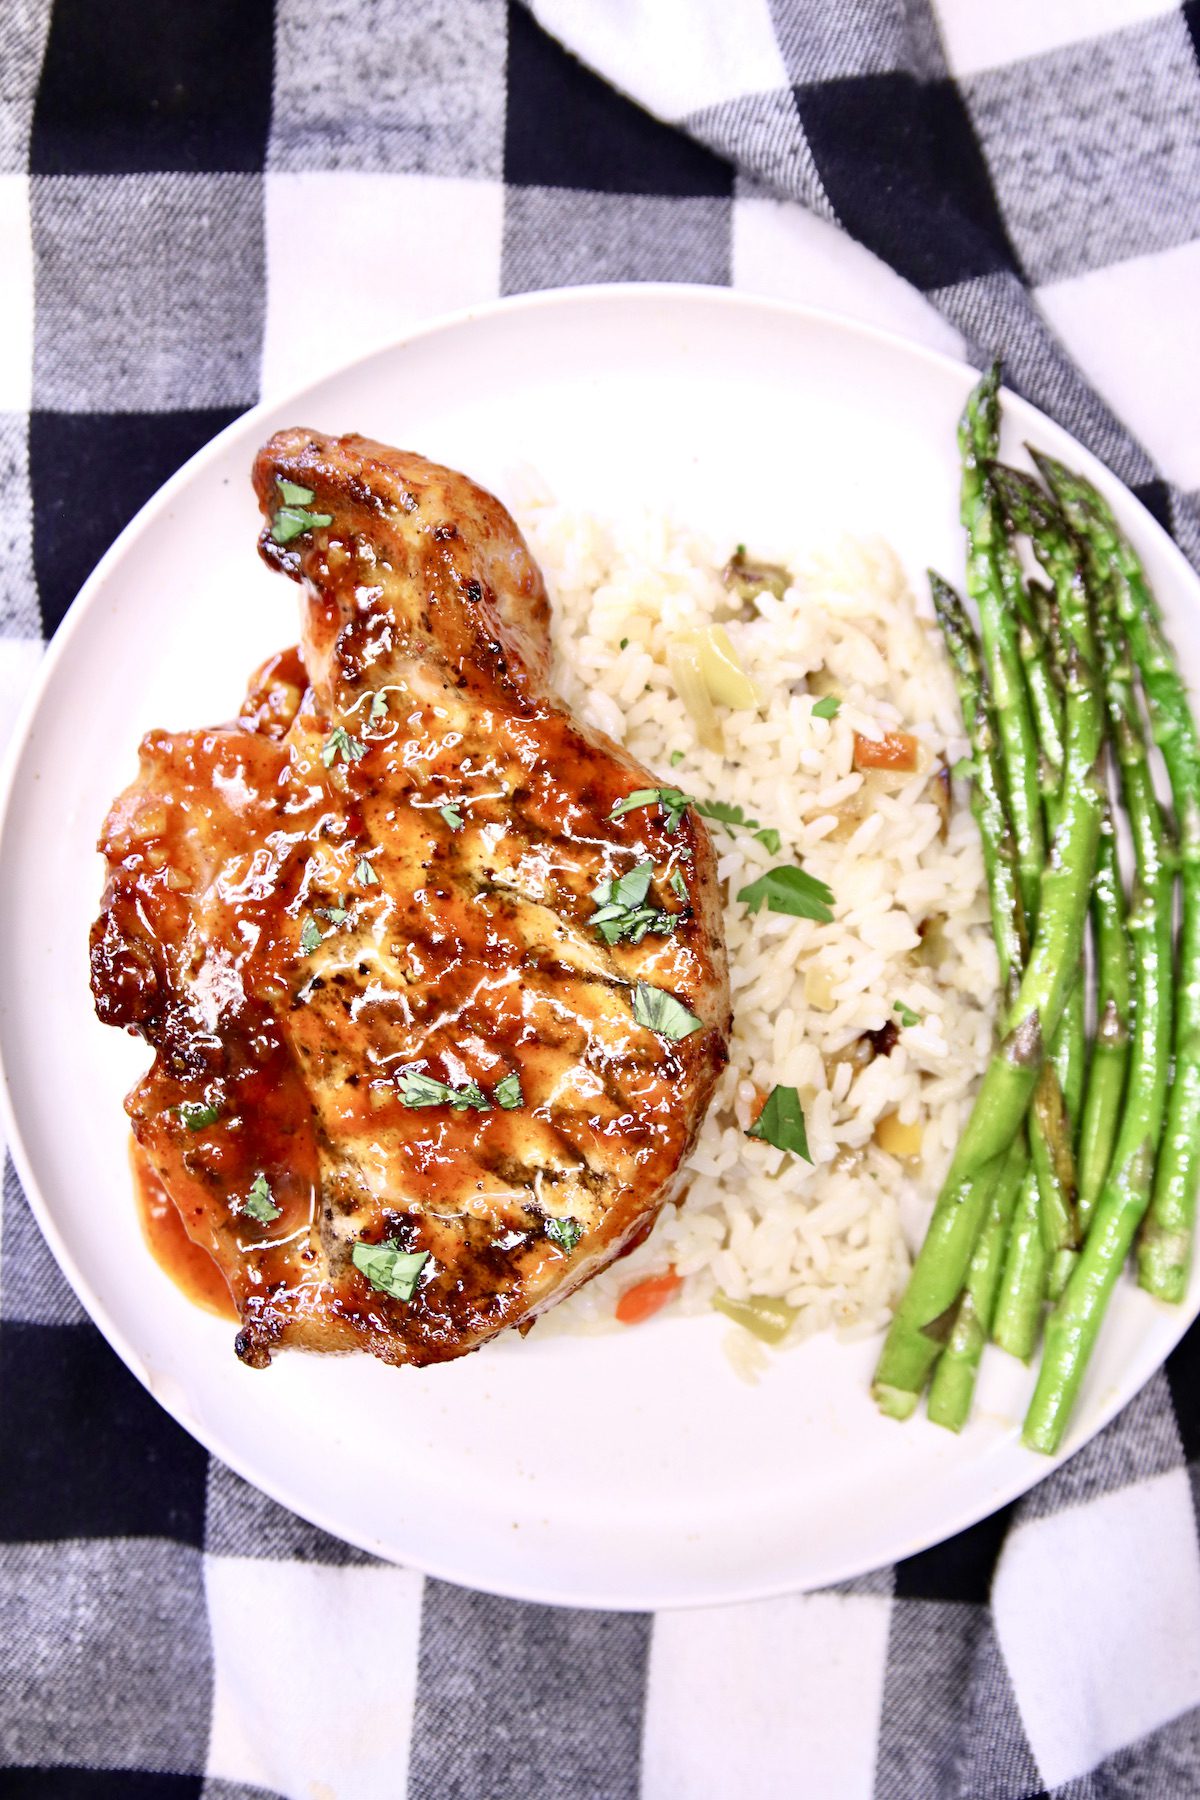 plate with bbq pork chop, rice pilaf and asparagus.